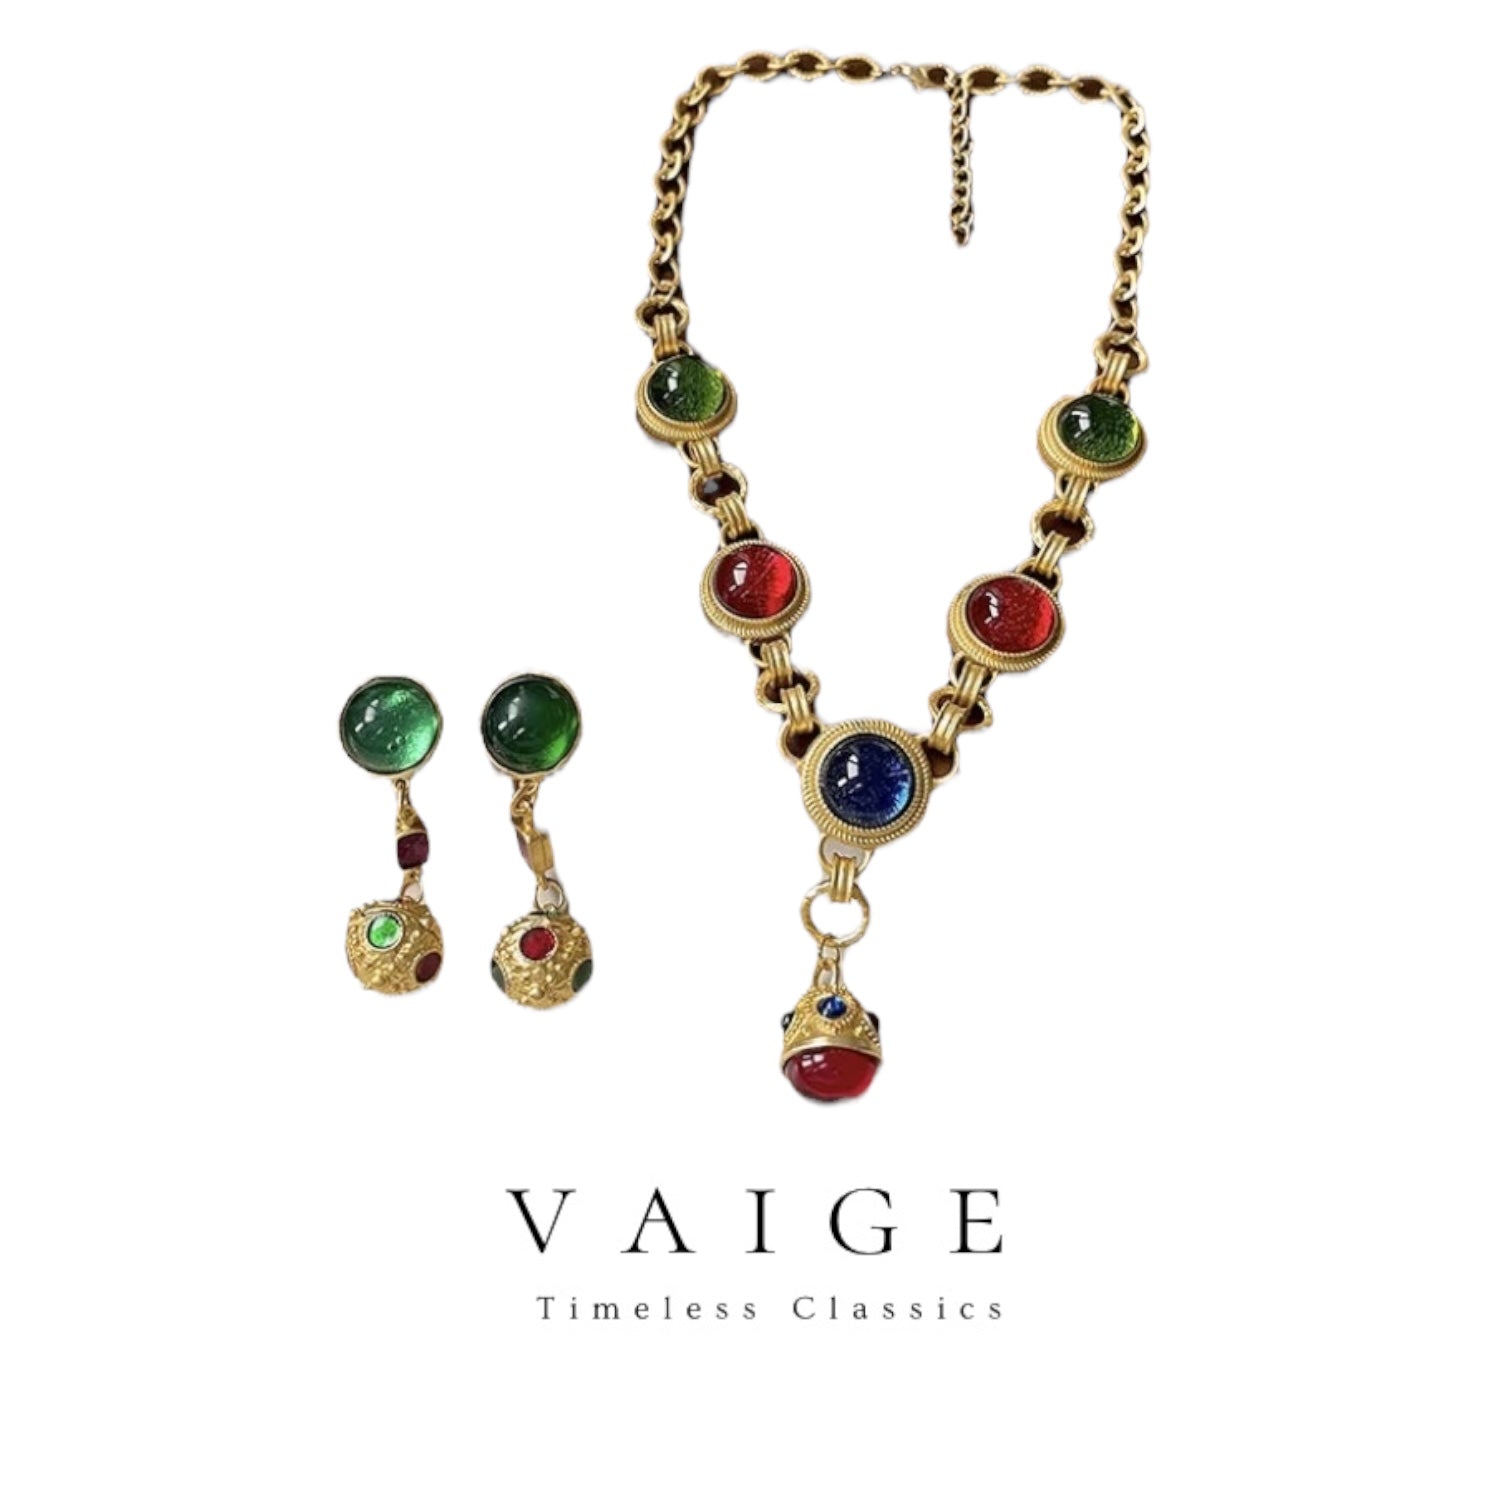 Vntage inspired lariat dangle circle gemstone gold necklace earrings